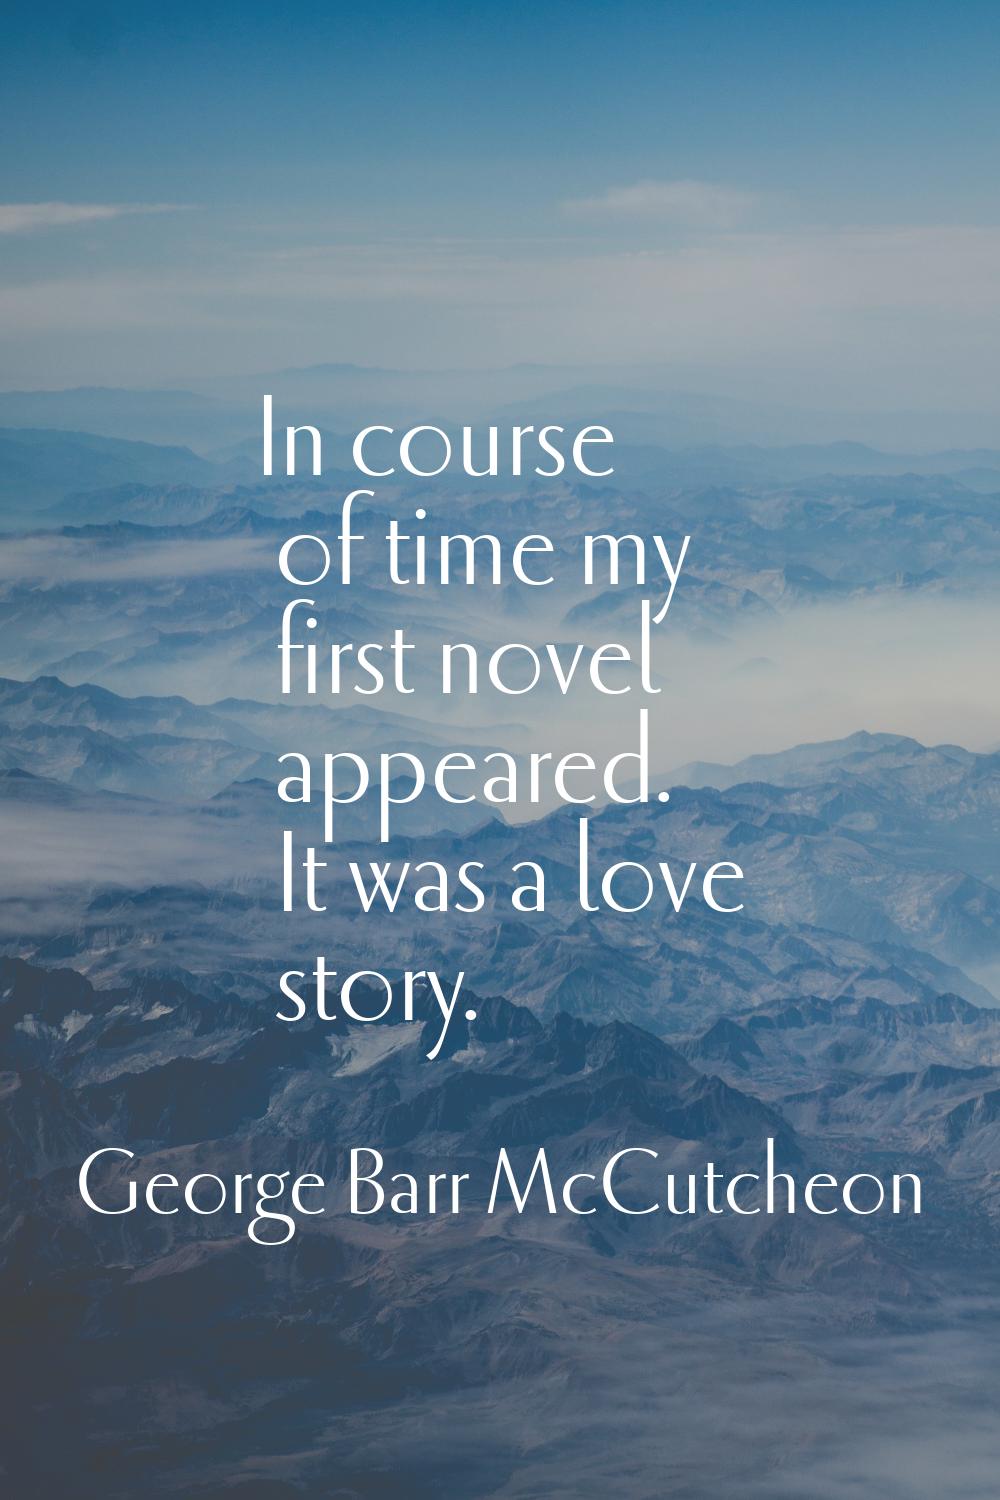 In course of time my first novel appeared. It was a love story.